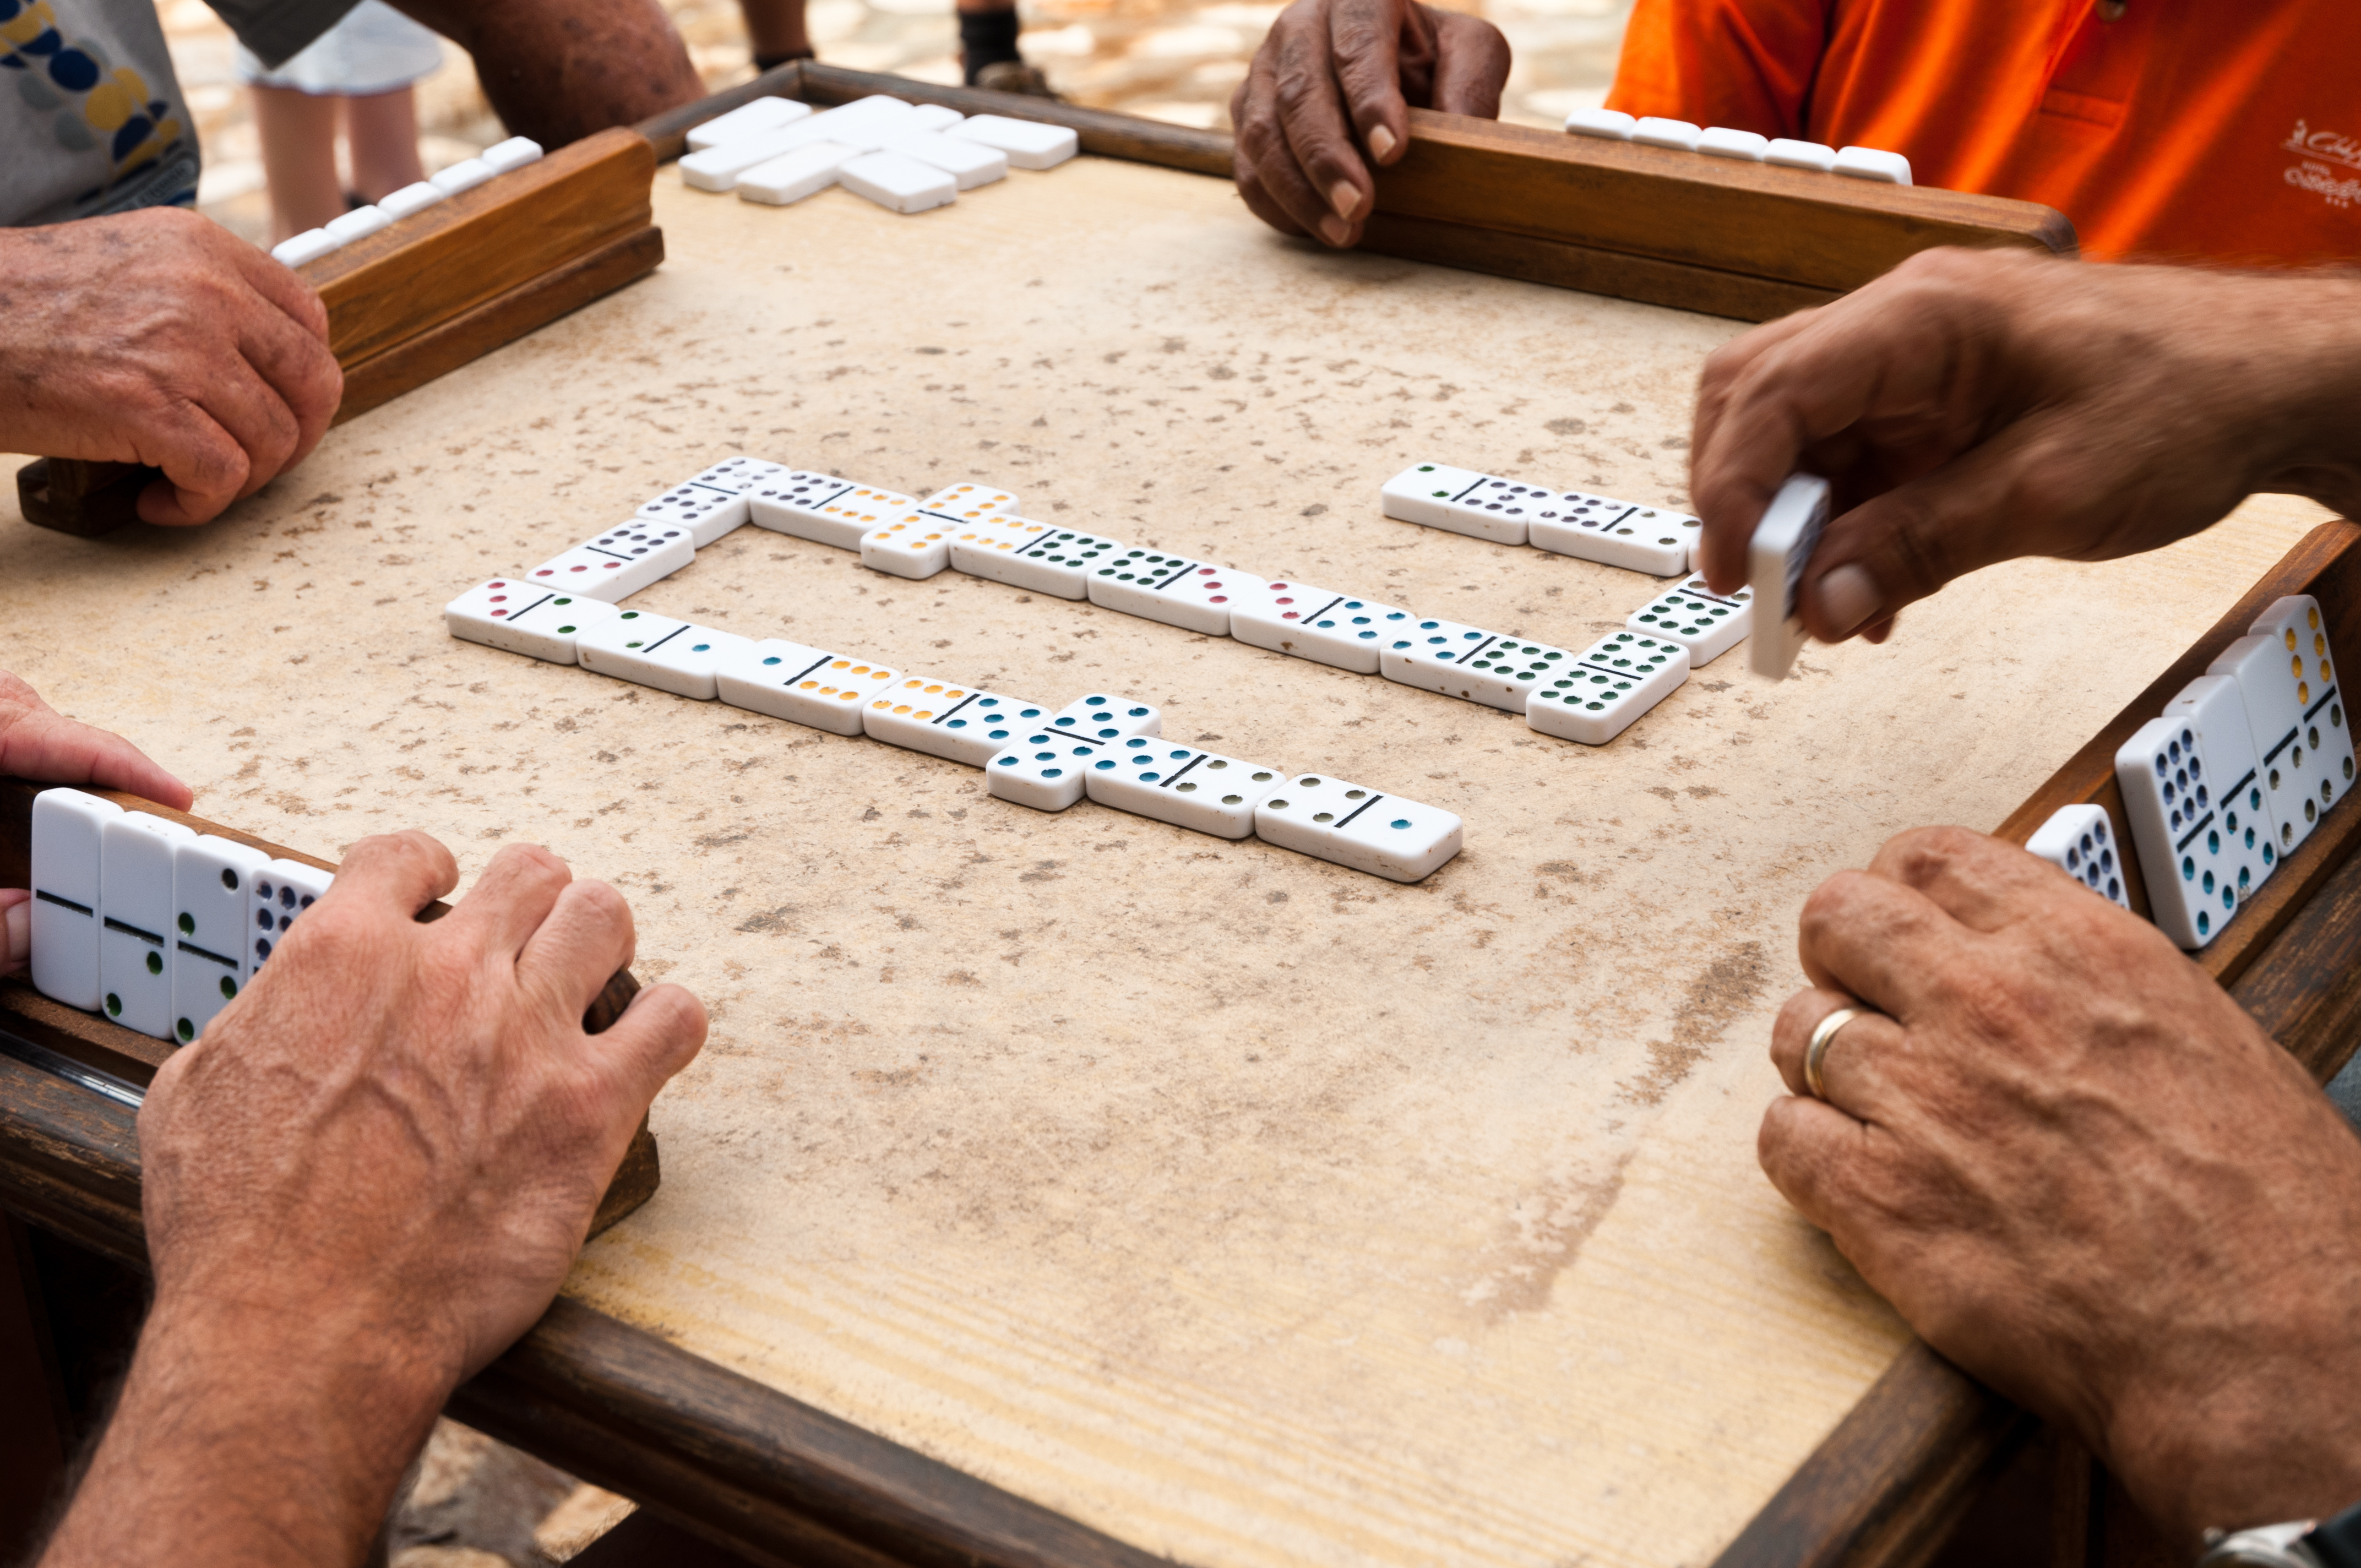 Cuban citizens are playing the dominoes game